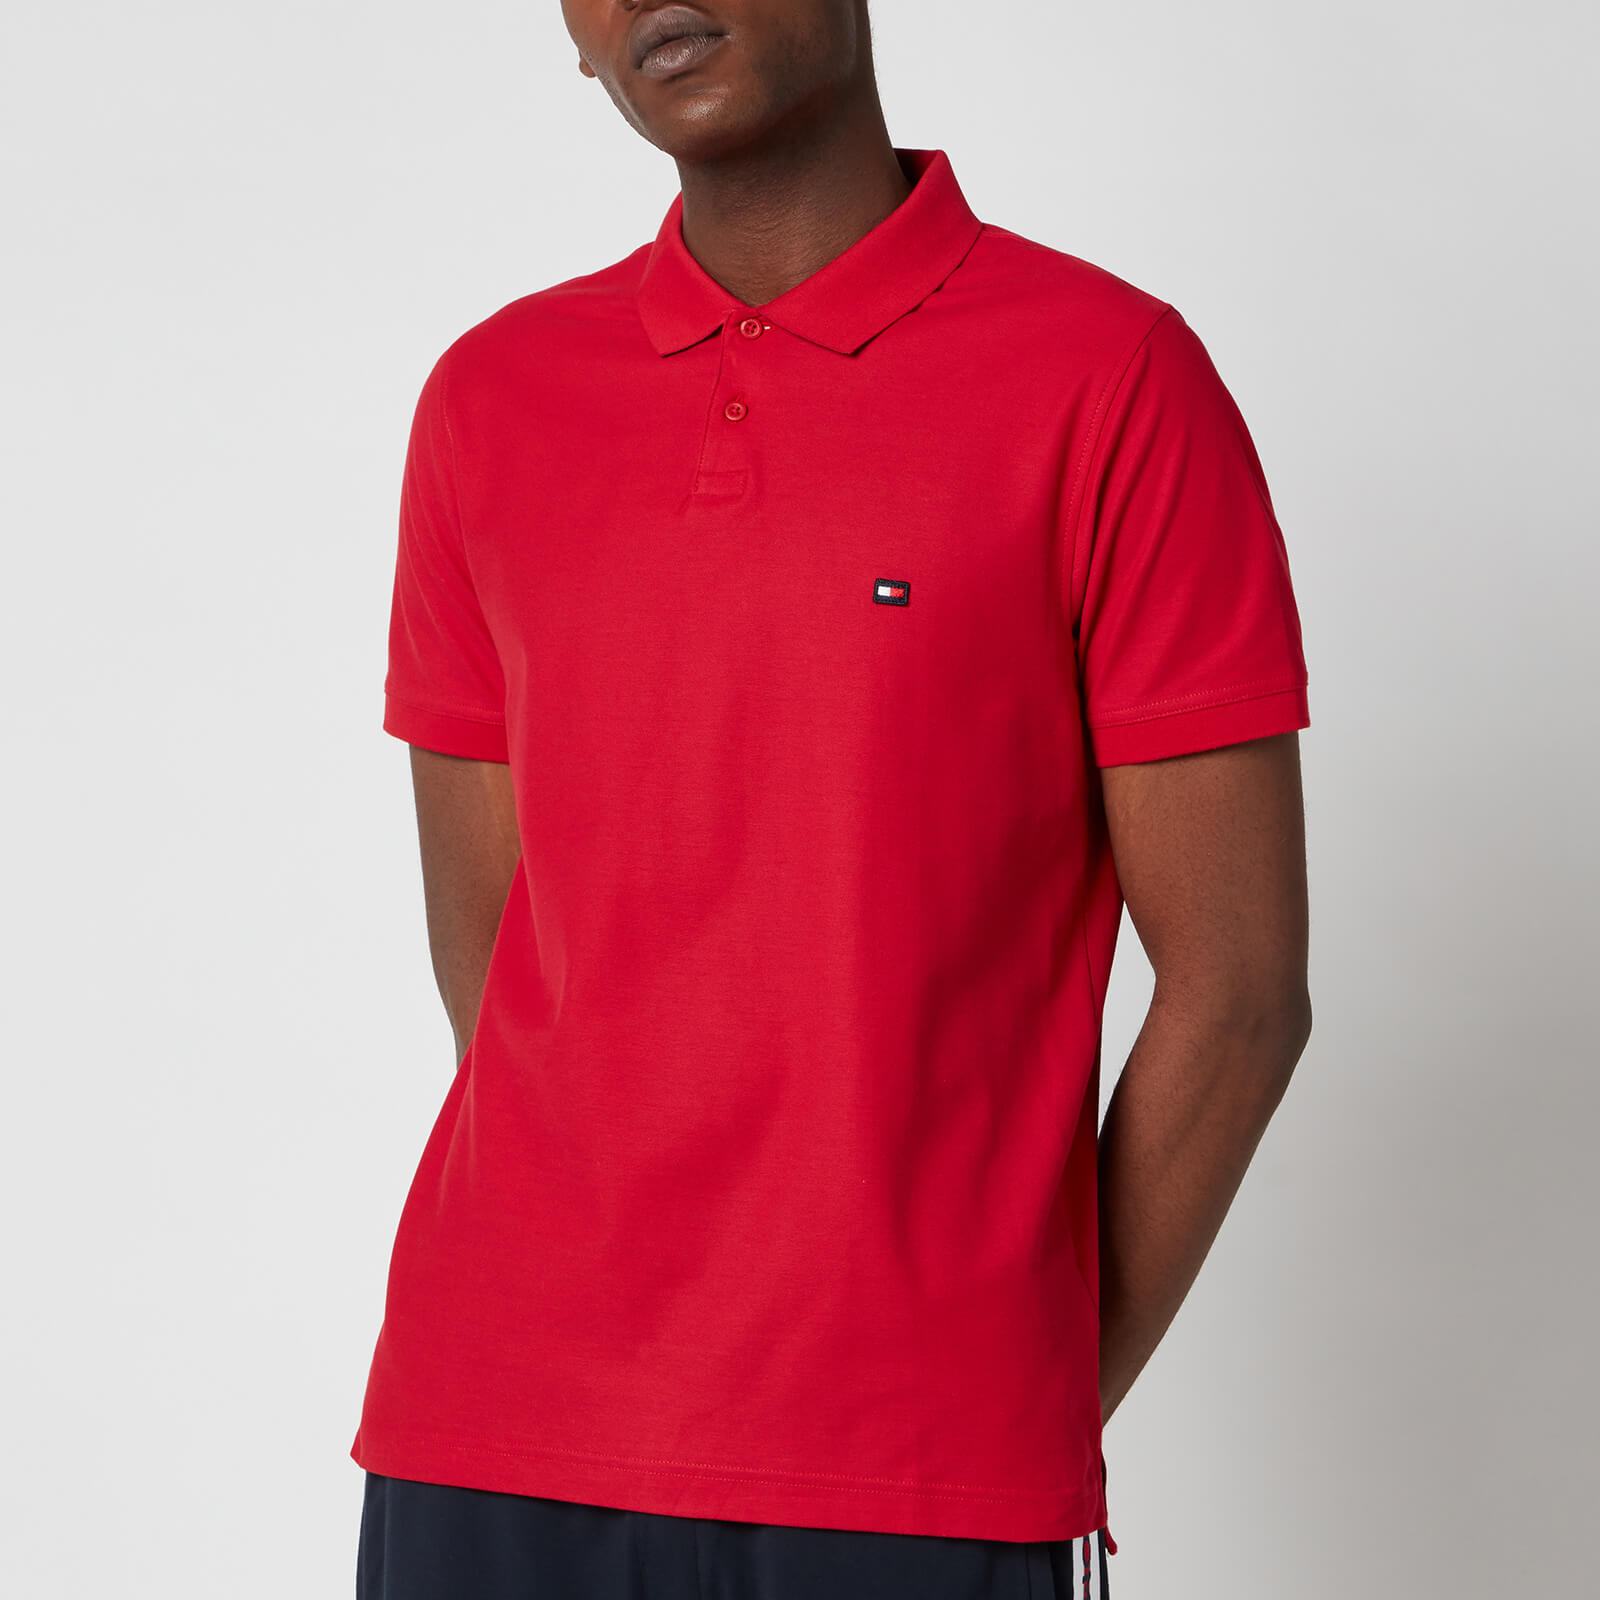 Tommy Hilfiger Men's 1985 Contrast Placket Slim Fit Polo Shirt - Primary Red - S